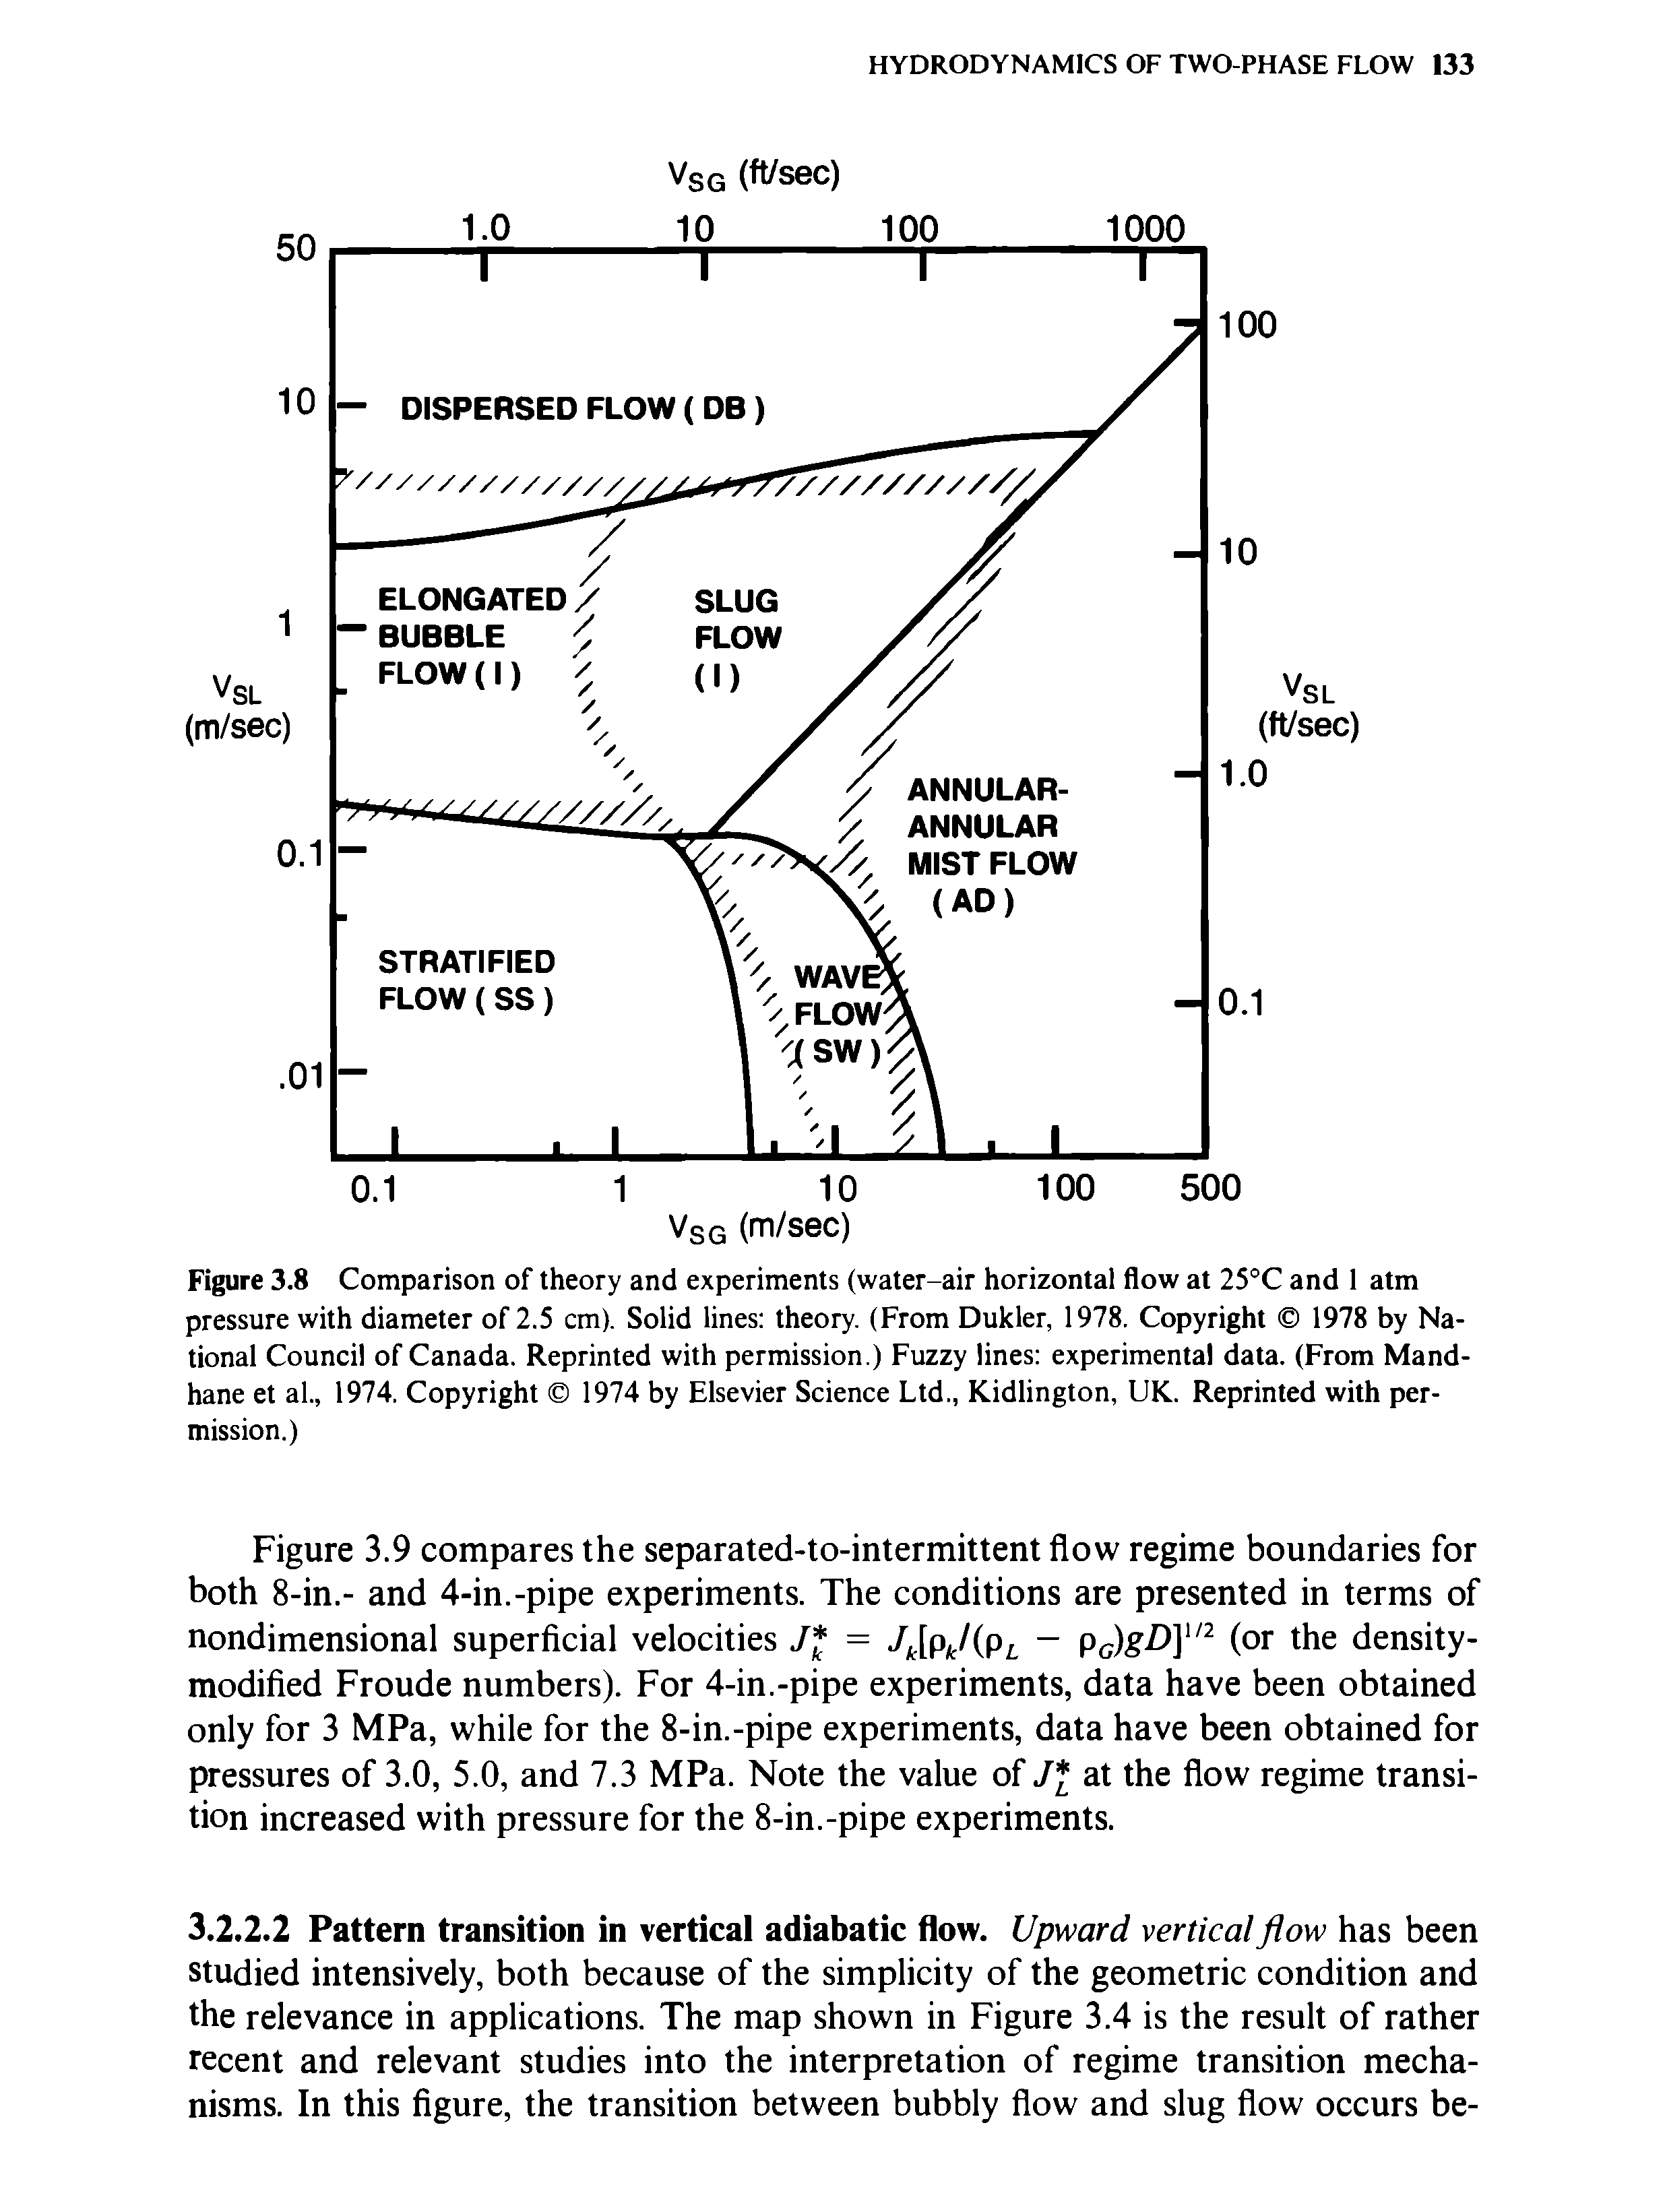 Figure 3.8 Comparison of theory and experiments (water-air horizontal flow at 25°C and 1 atm pressure with diameter of 2.5 cm). Solid lines theory. (From Dukler, 1978. Copyright 1978 by National Council of Canada. Reprinted with permission.) Fuzzy lines experimental data. (From Mand-hane et al., 1974. Copyright 1974 by Elsevier Science Ltd., Kidlington, UK. Reprinted with permission.)...